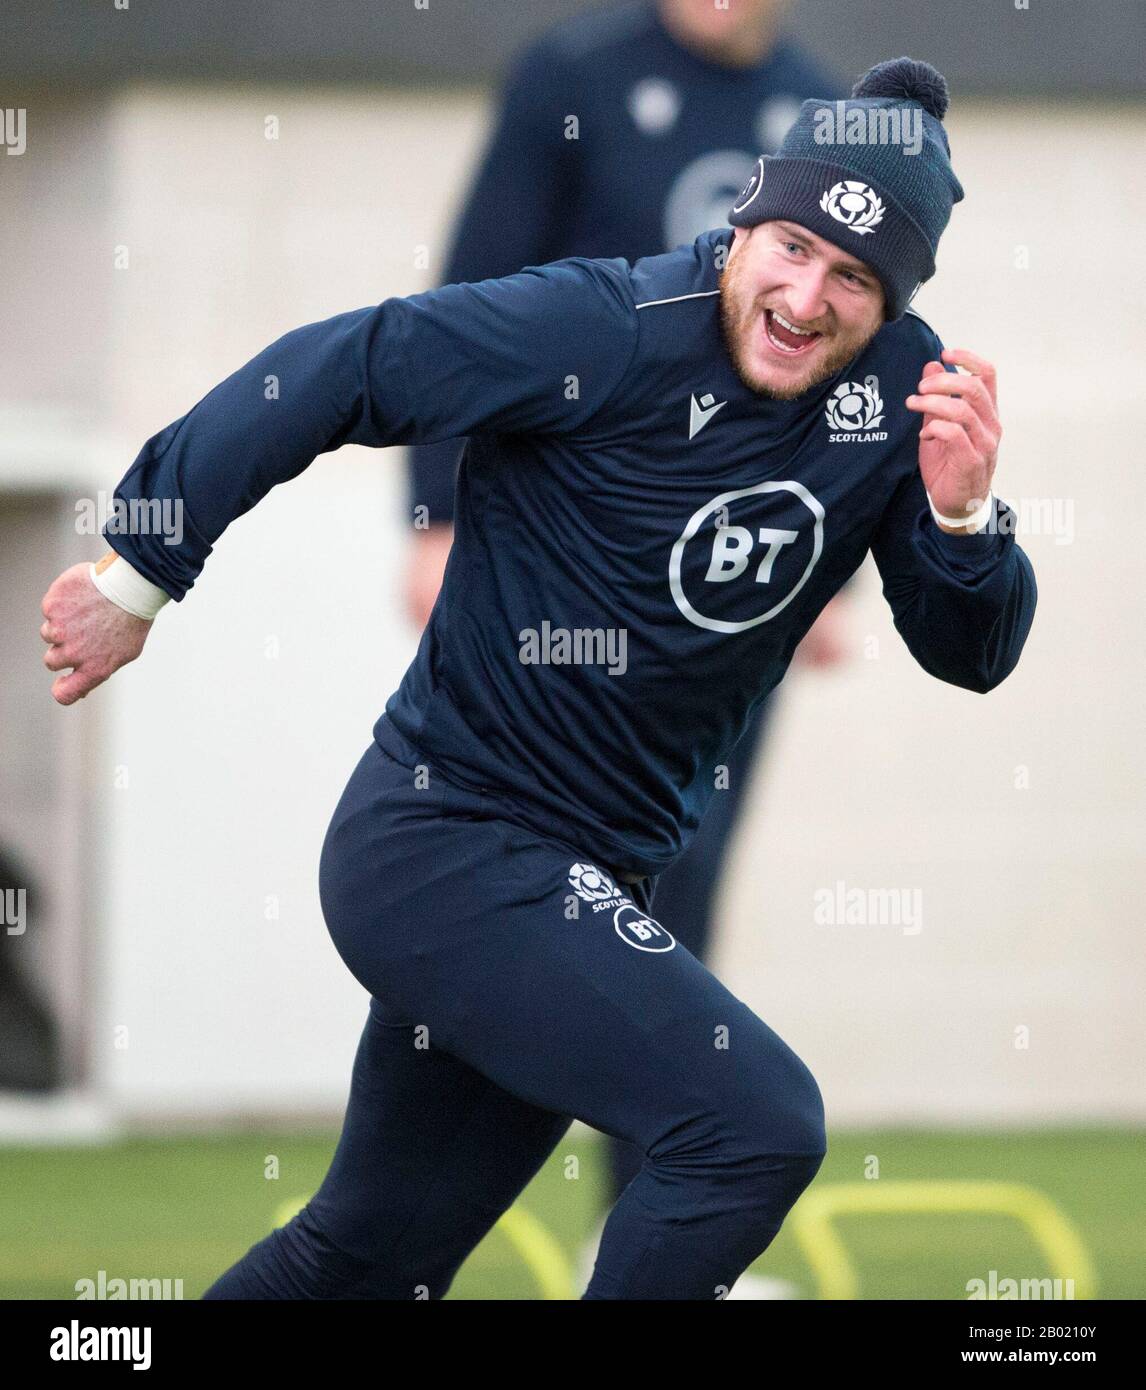 Oriam Sports Centre, Heriot-Watt University's Riccarton campus, Edinburgh: 18th February, 2020. Scotland rugby team training session prior to their Guinness Six Nations match against Italy in Rome. Scotland captain Stuart Hogg.  Credit: Ian Rutherford/Alamy Live News Stock Photo